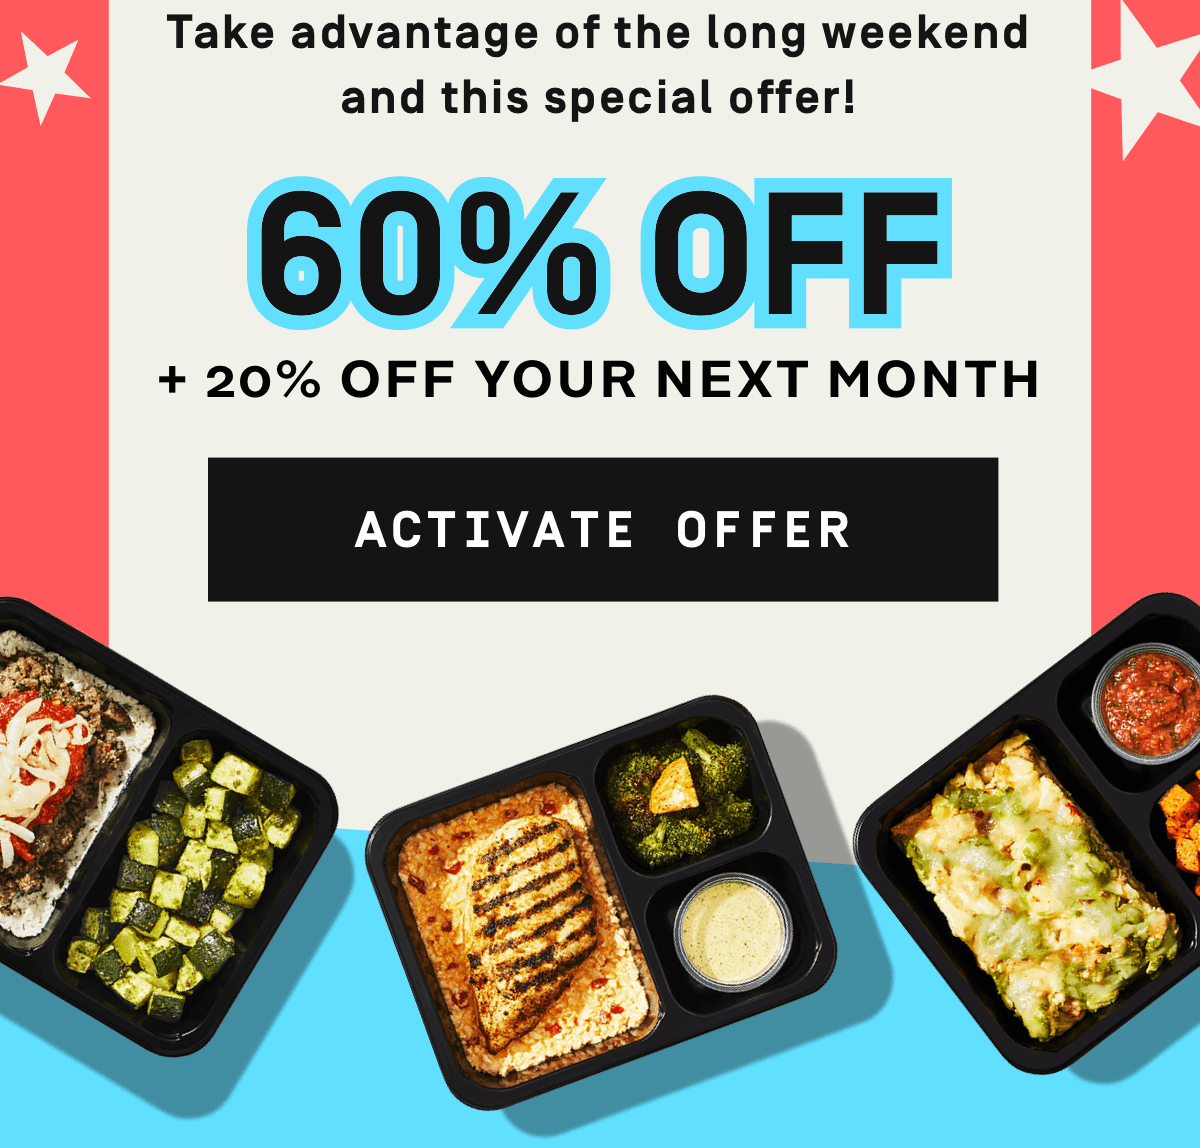 Take advantage of the long weekend and this special offer! 60% OFF + 20% OFF your next month | Activate Offer